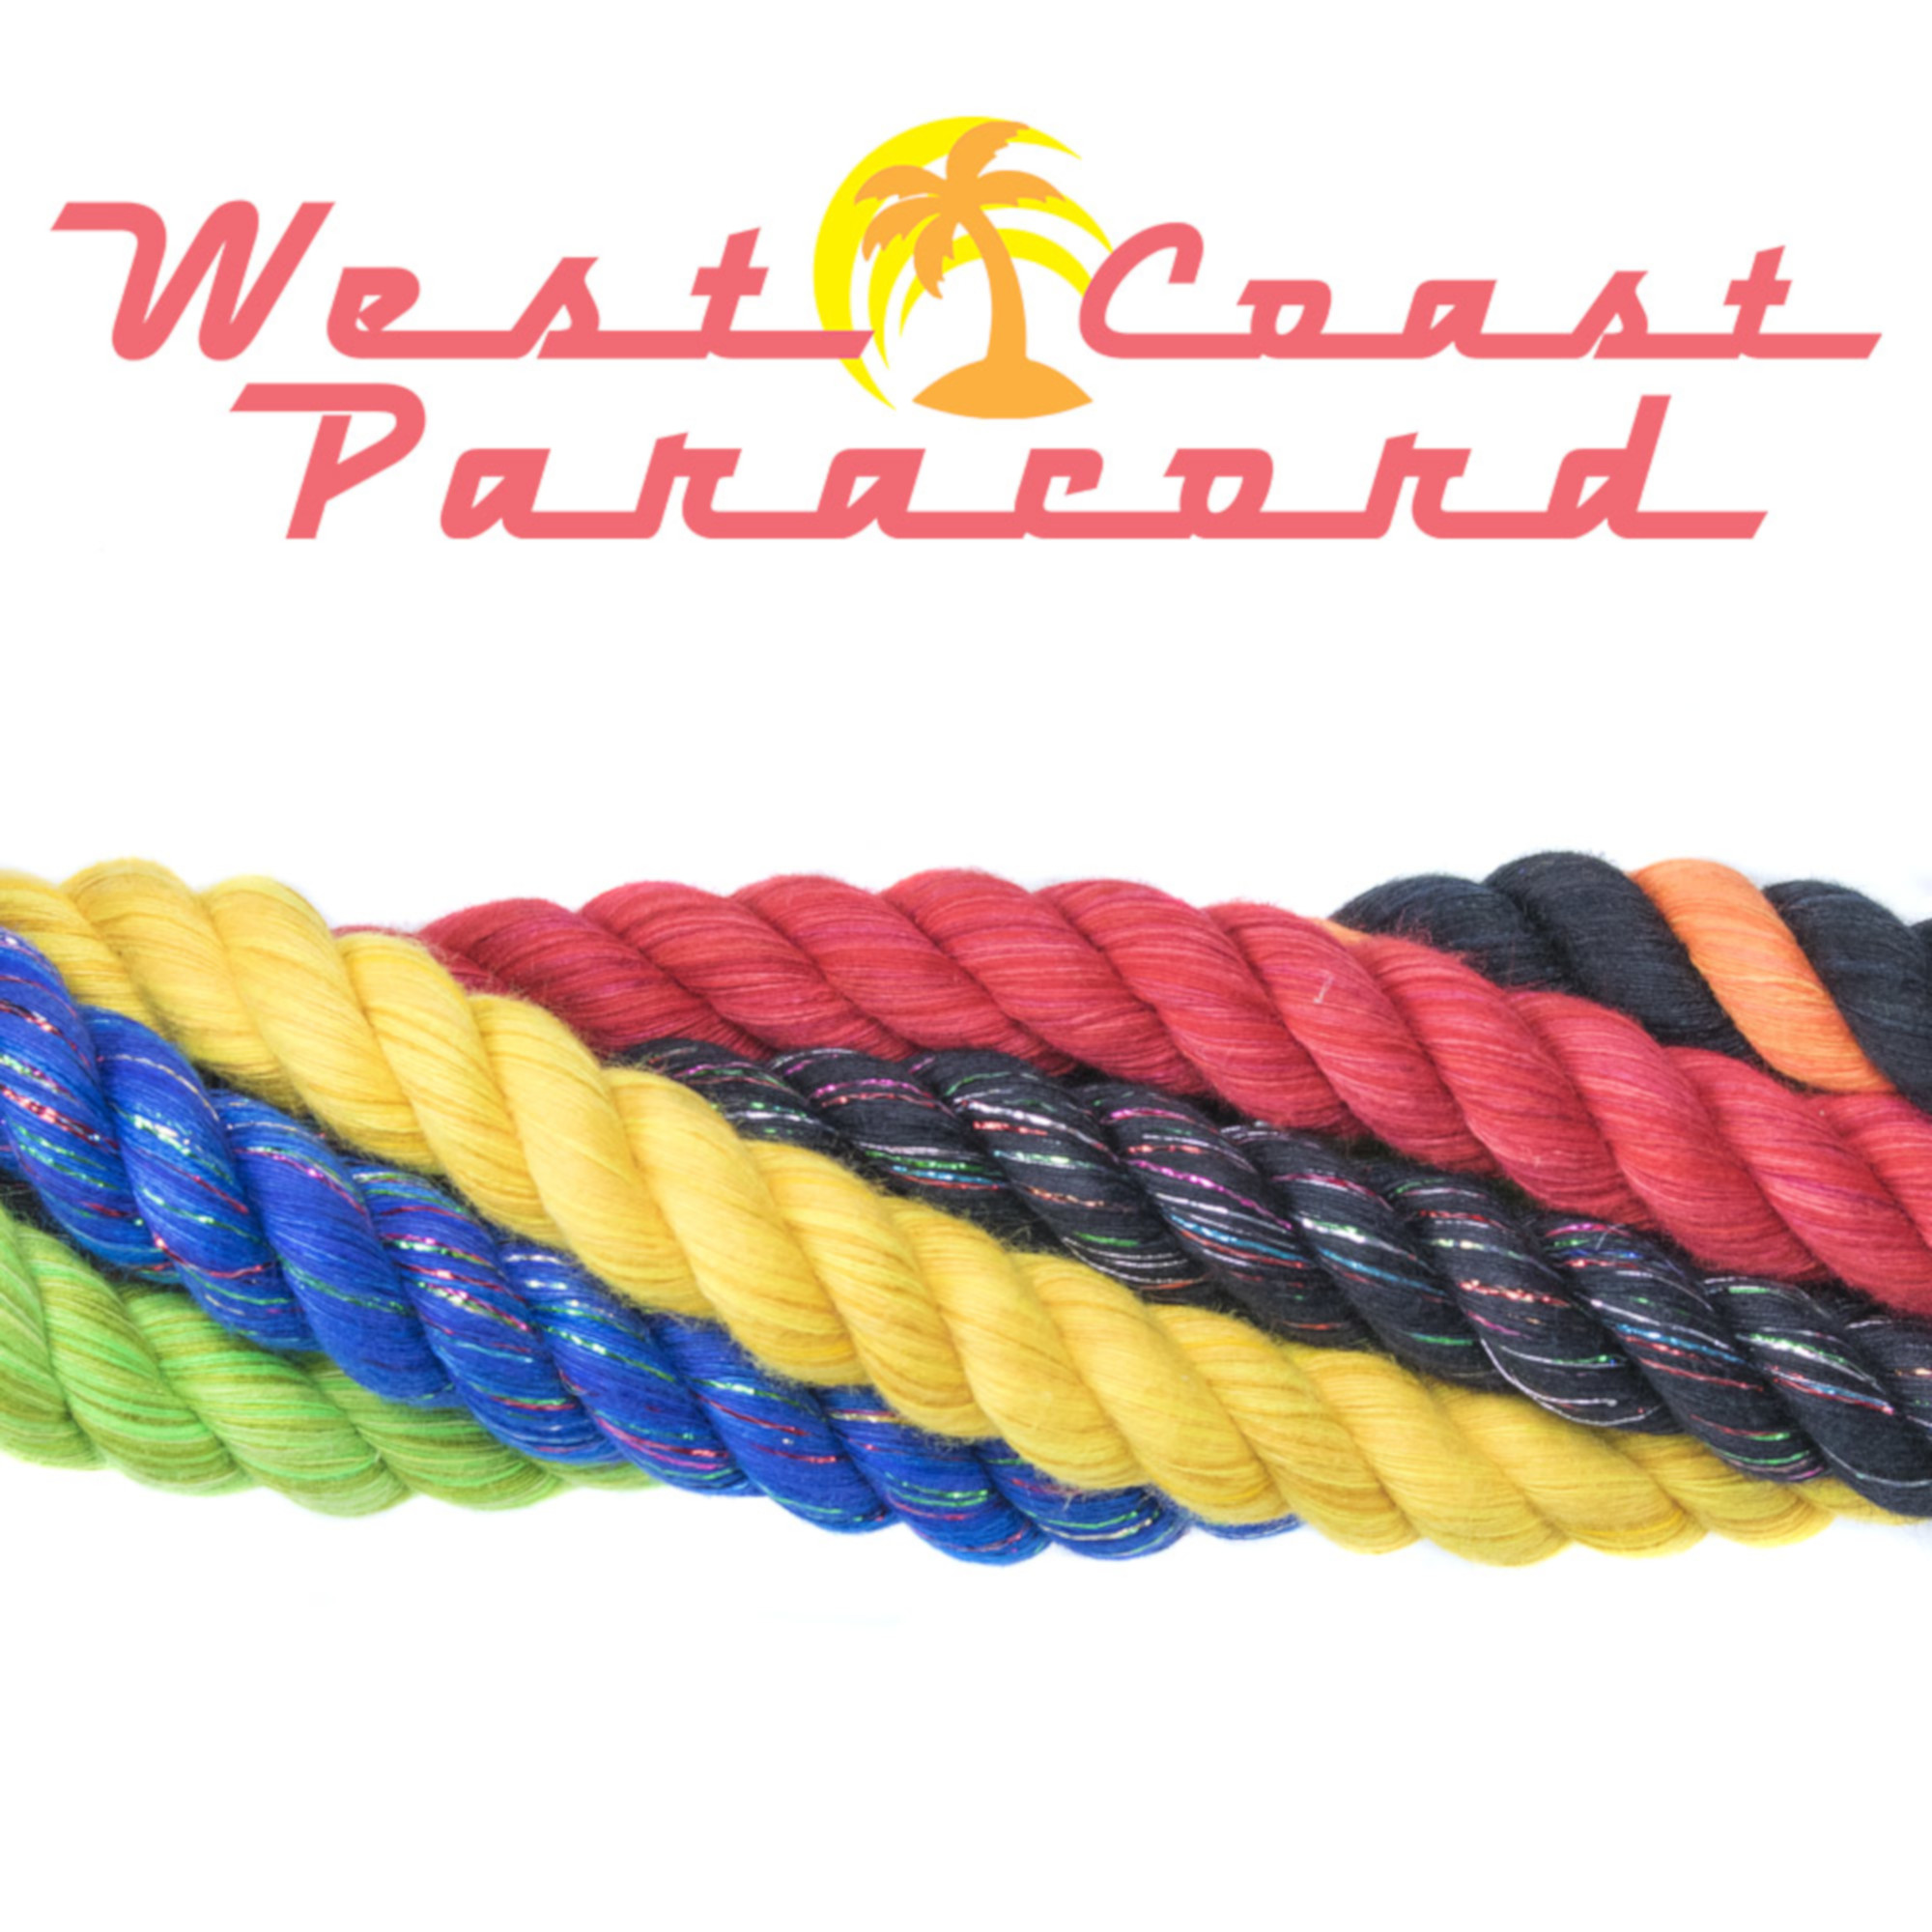 West Coast Paracord Natural Cotton Rope 1/2 Inch Twisted Soft Rope by the Foot in 25 Feet, 50 Feet, 100 Feet, and 600 Feet. Pet Safe and USA Made - image 4 of 4